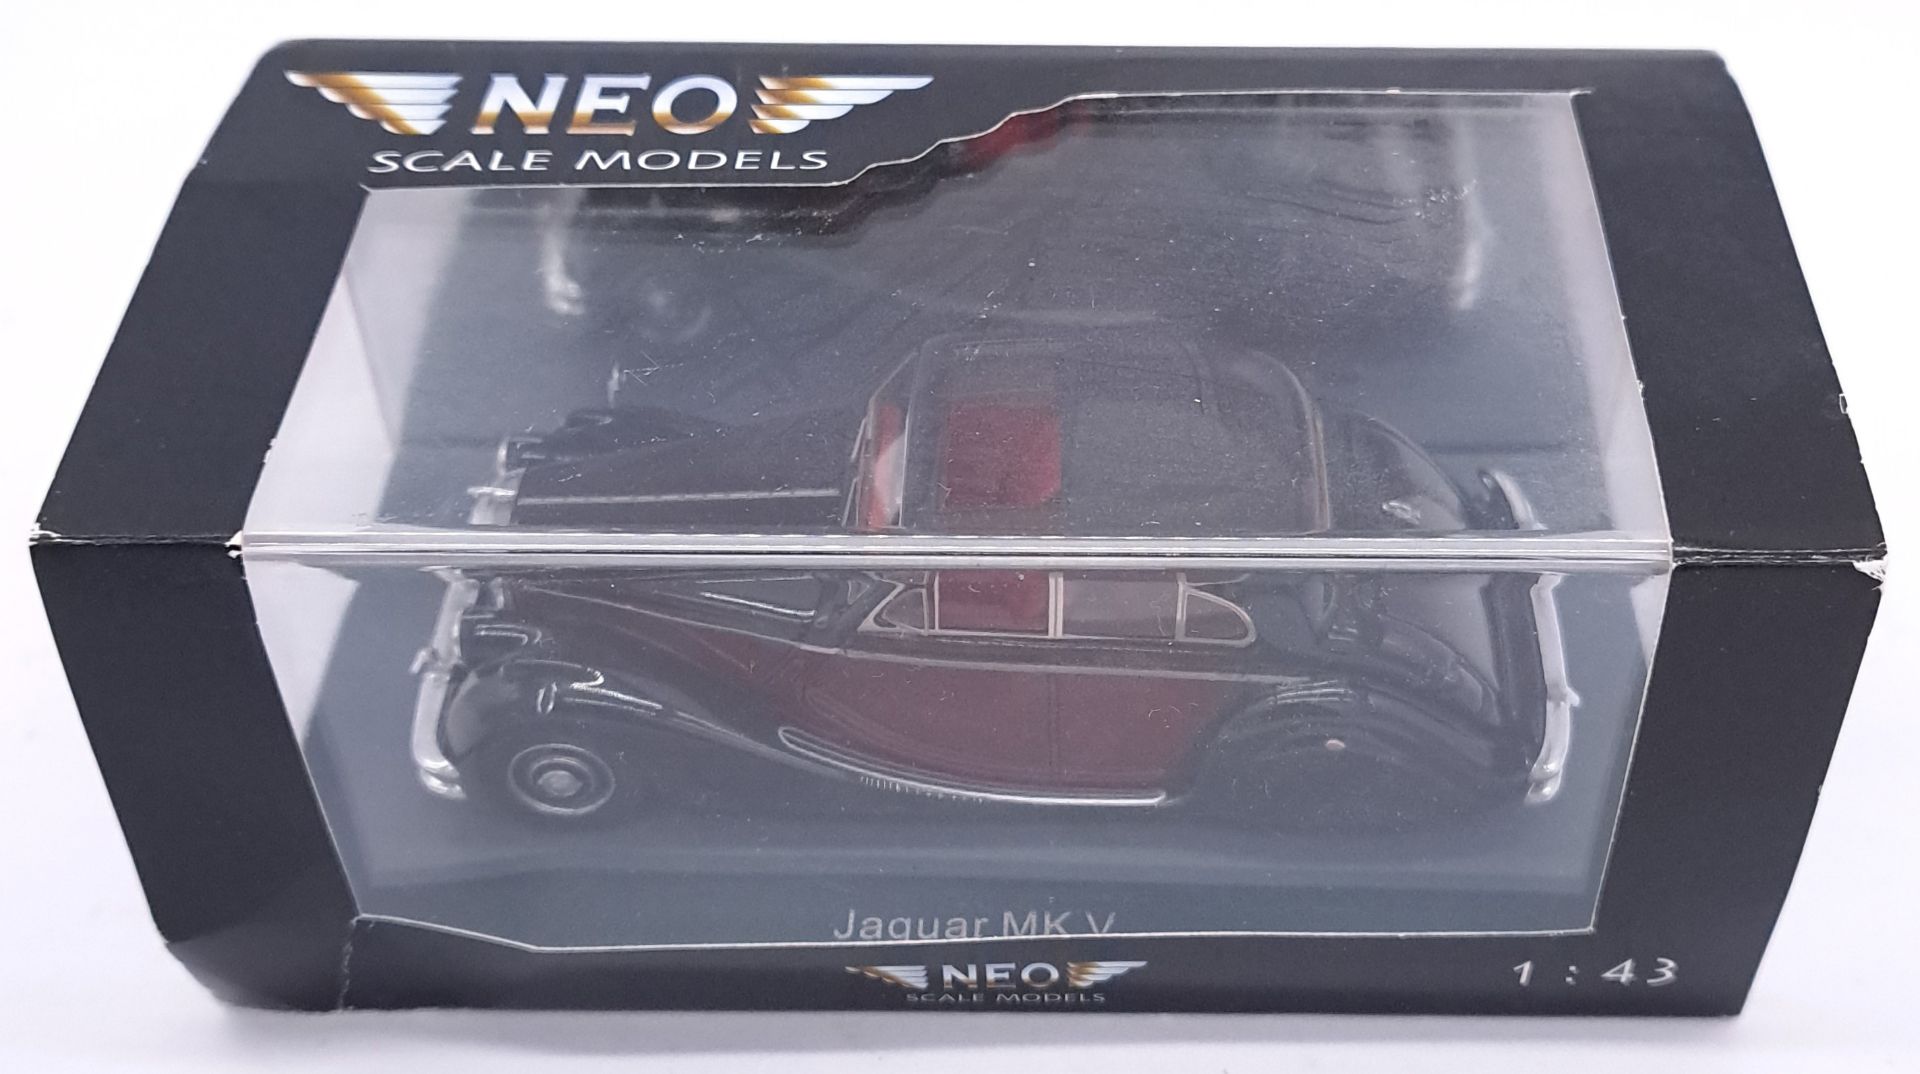 NEO Scale Models, a boxed 1:43 scale group - Bild 4 aus 4